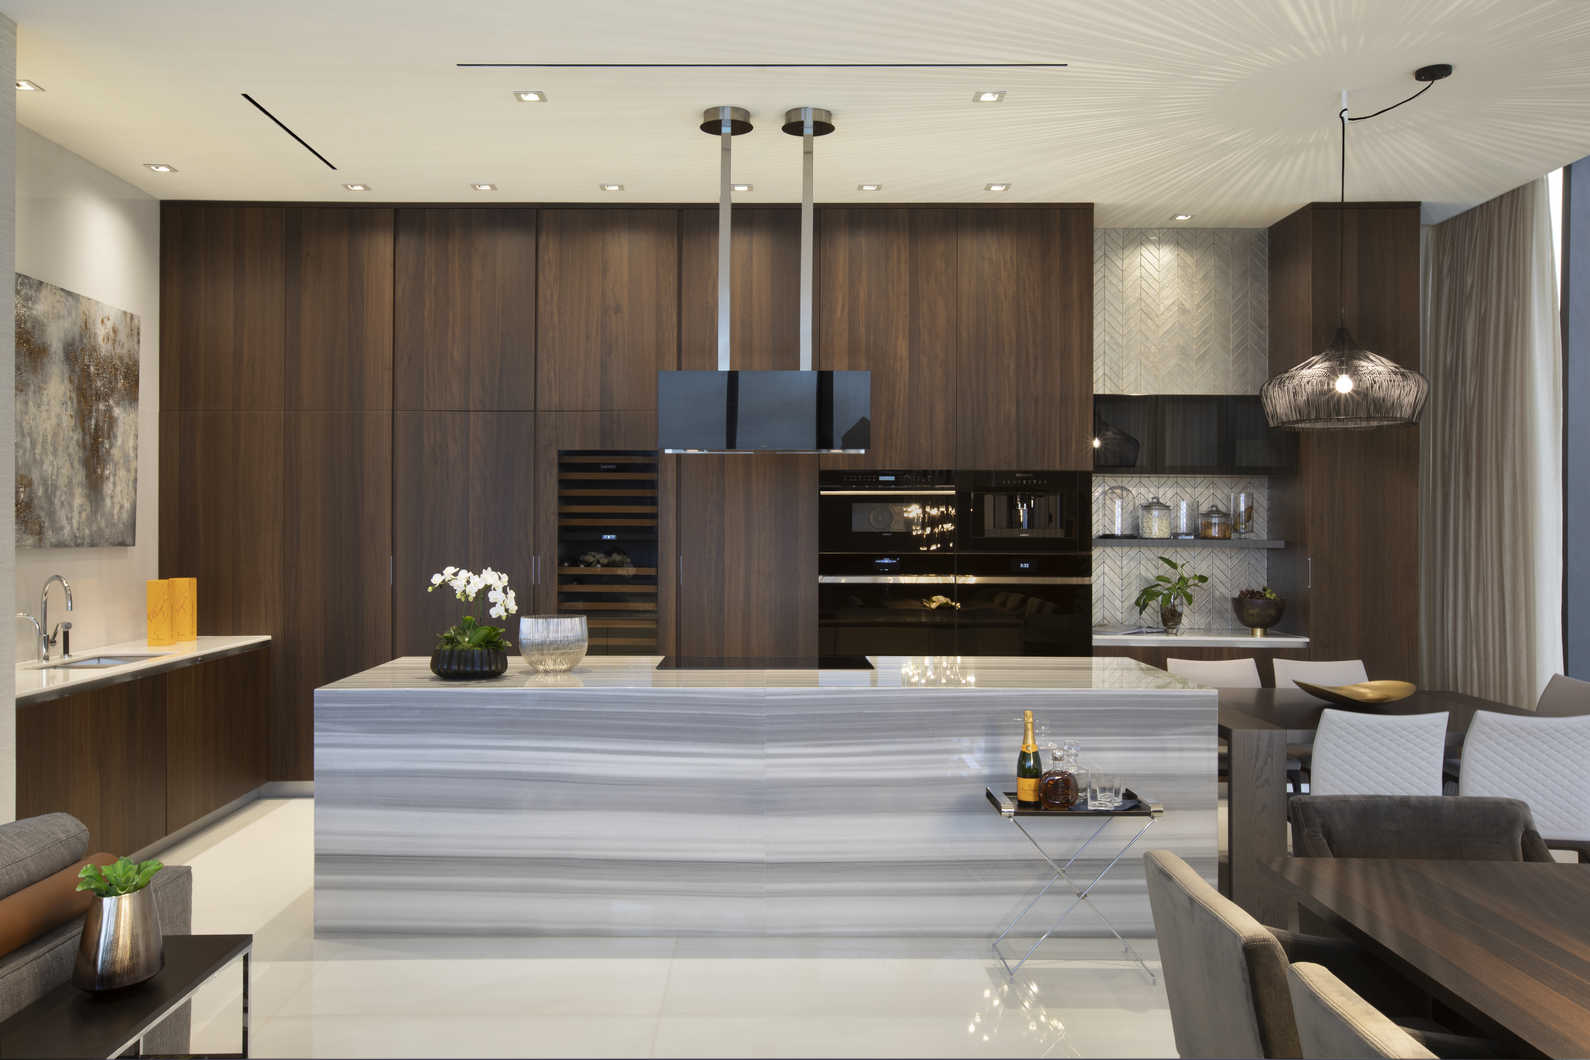 Luxe Waterfront Condo - Residential Interior Design From DKOR Interiors